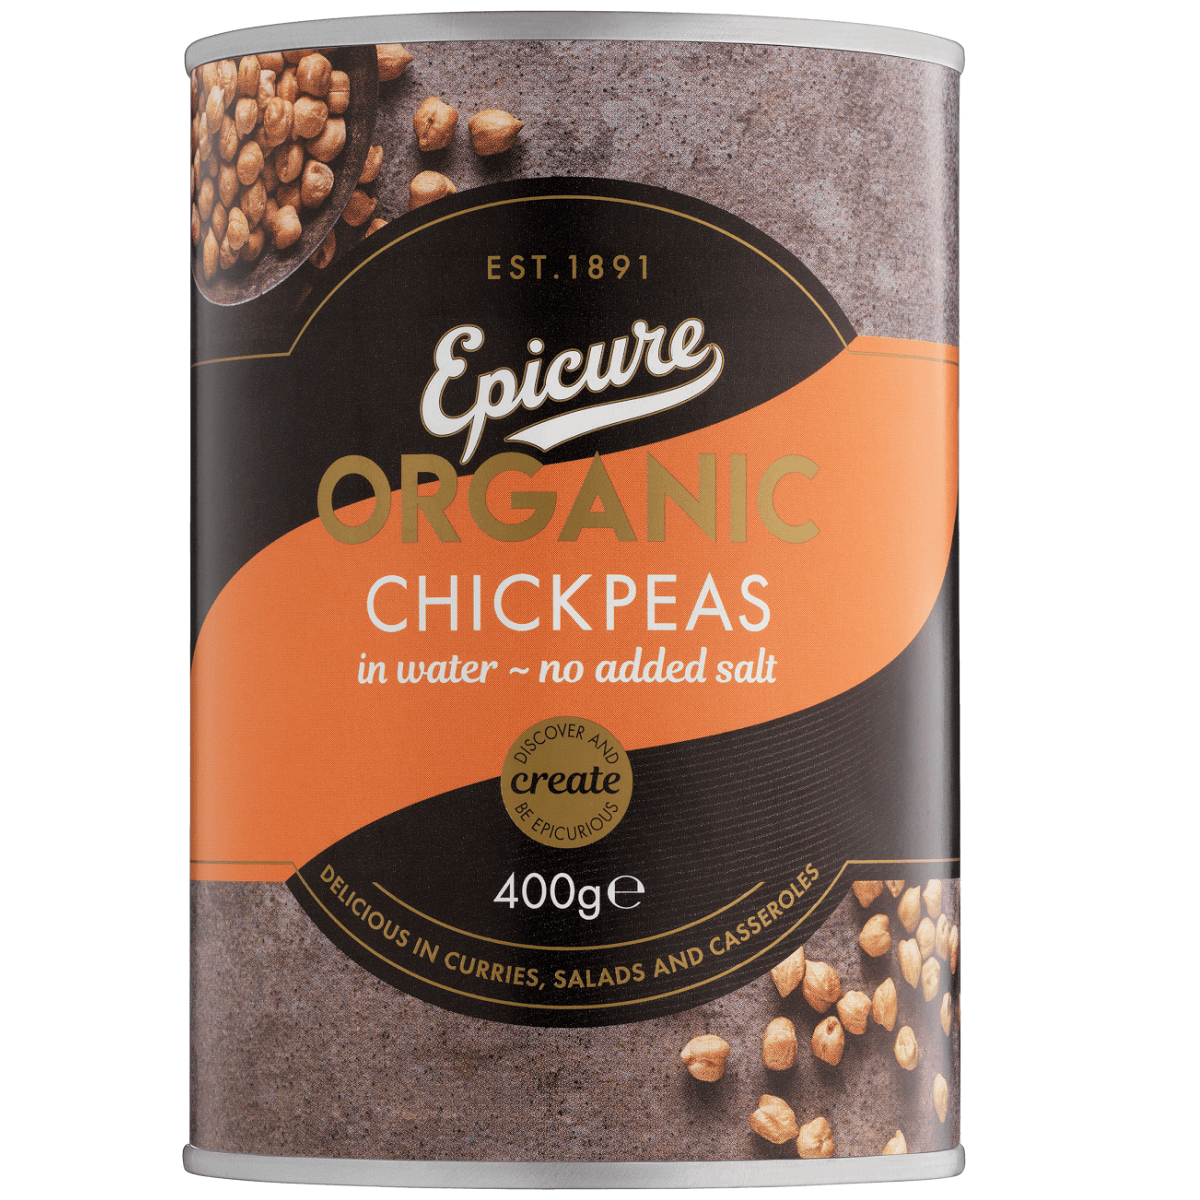 Epicure Organic Chick Peas in water no added salt 400g